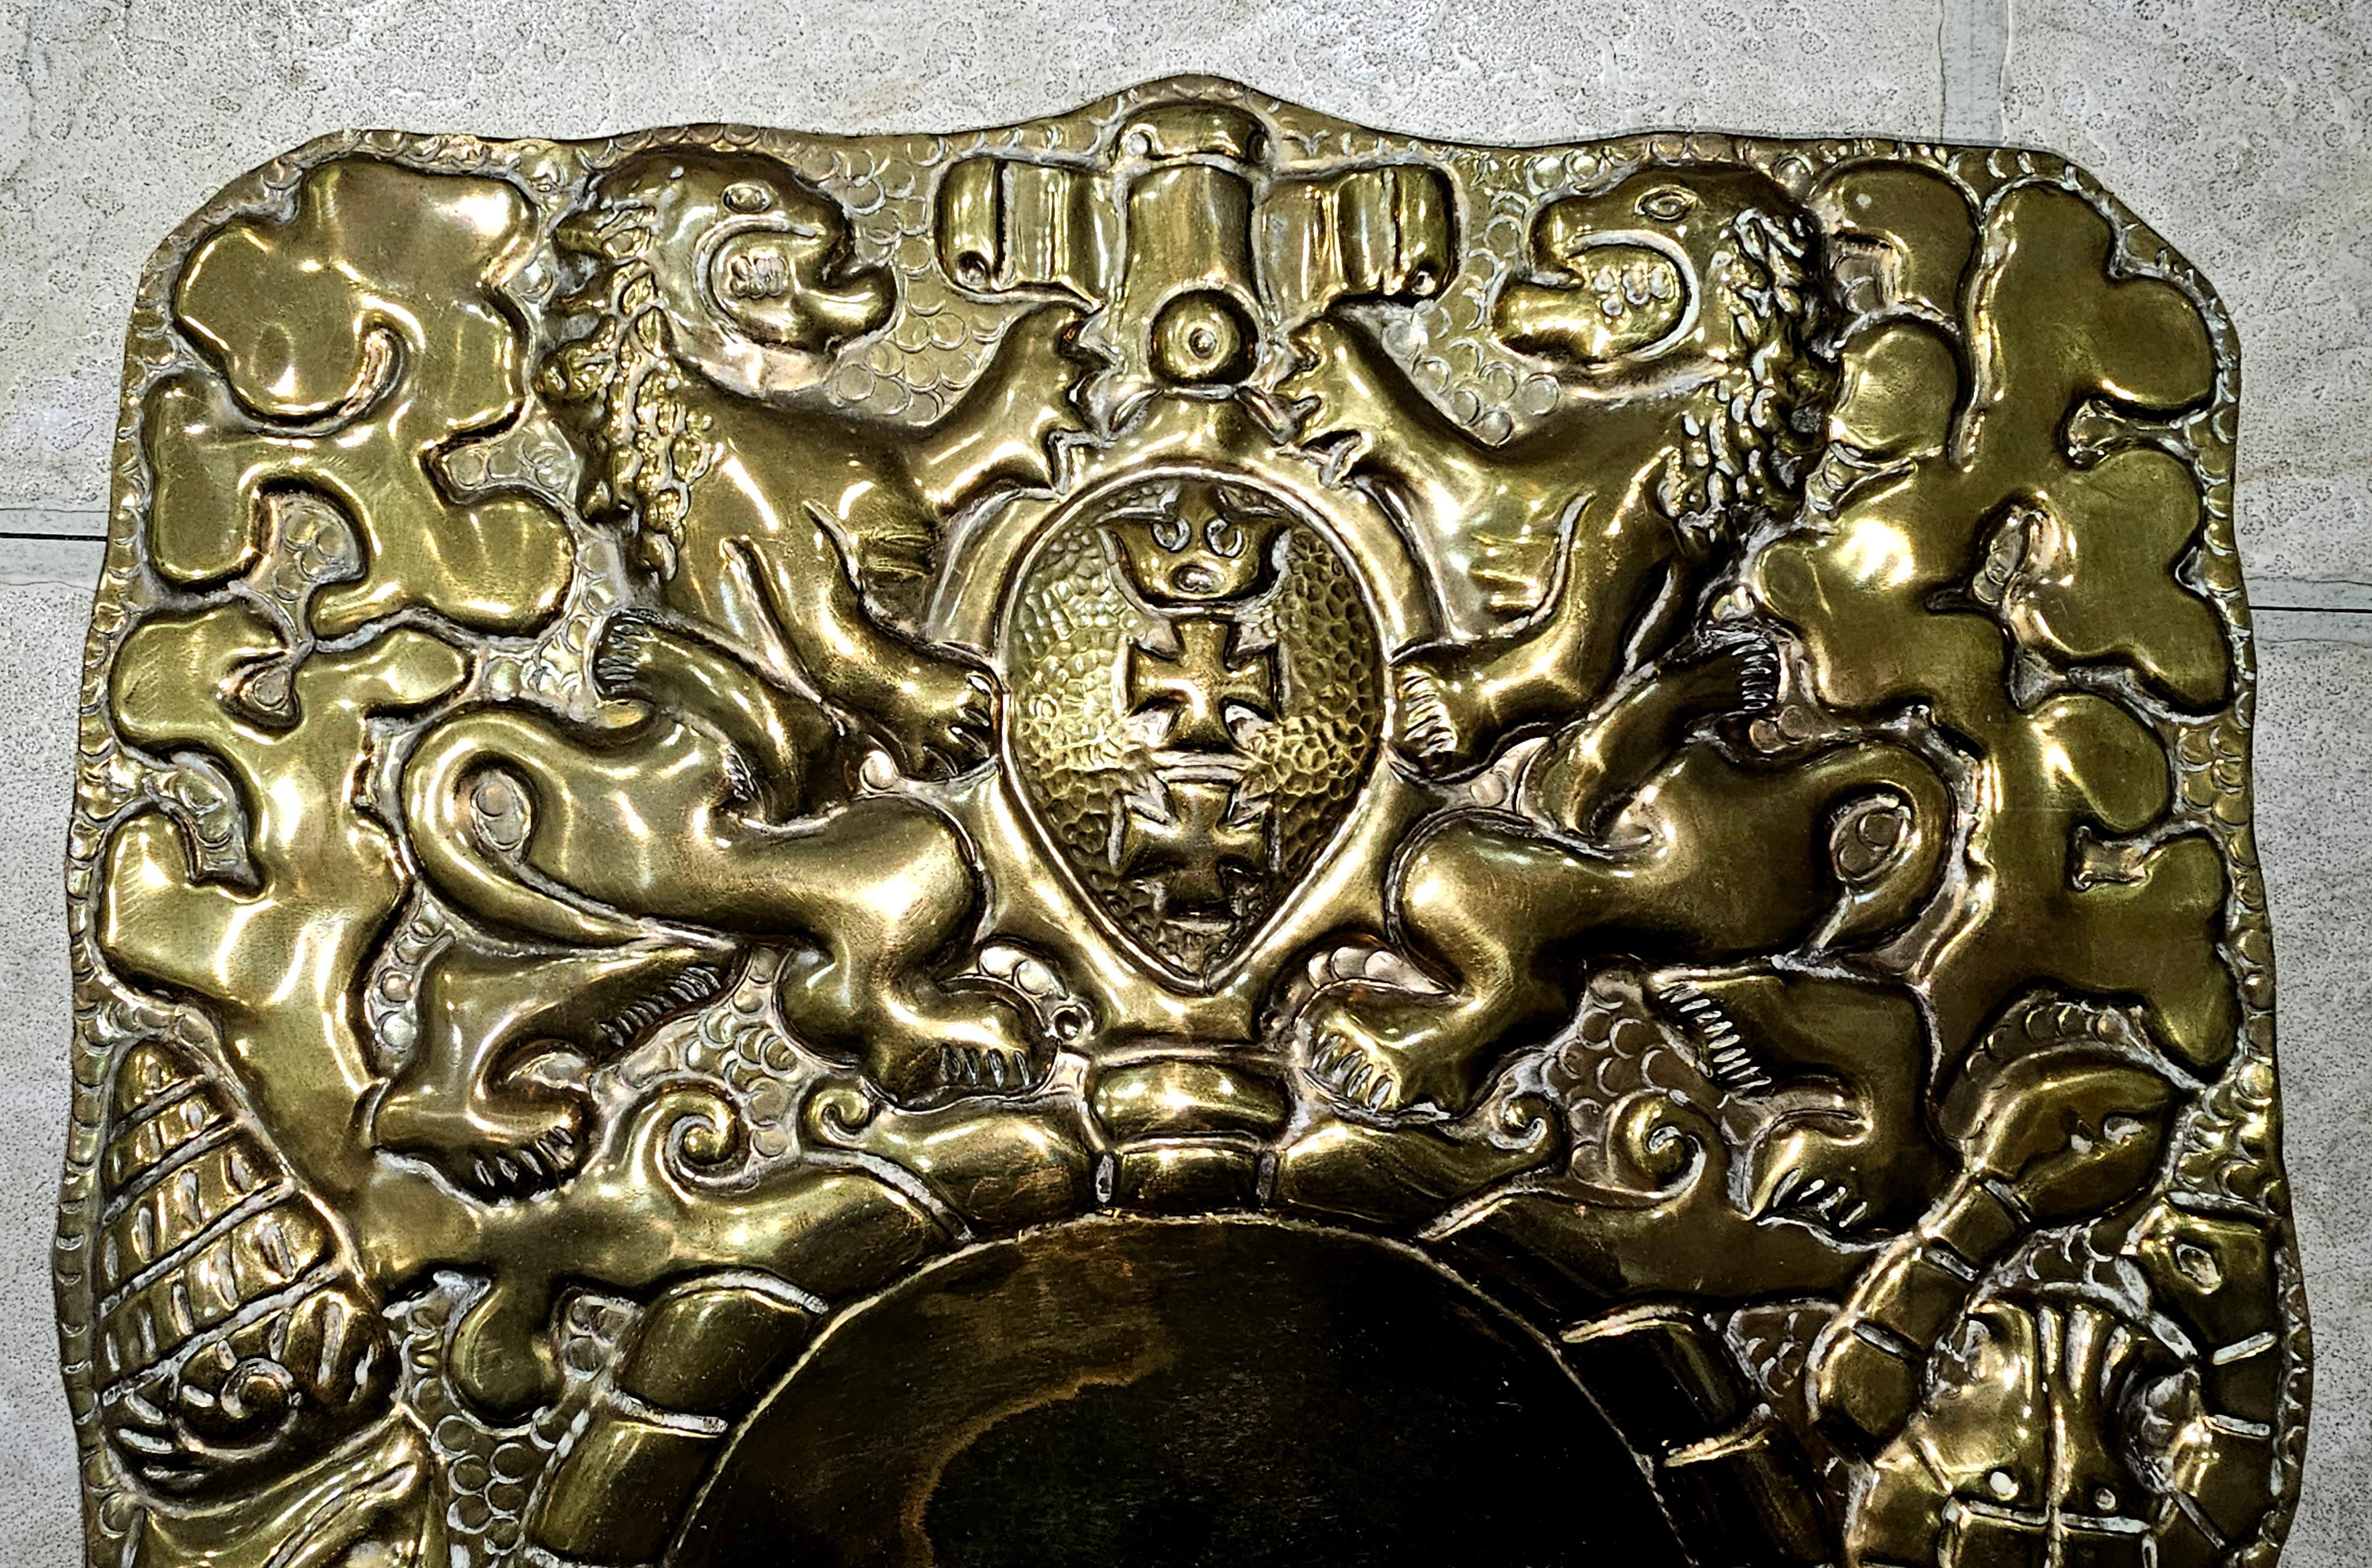 A Pair of Swiss Coat of Arms Lion Heraldry Repoussé Brass Candle Sconces featuring the Swiss Coat of Arms and adorned with crab, snails and lobster, all in repoussé.
Measure 12